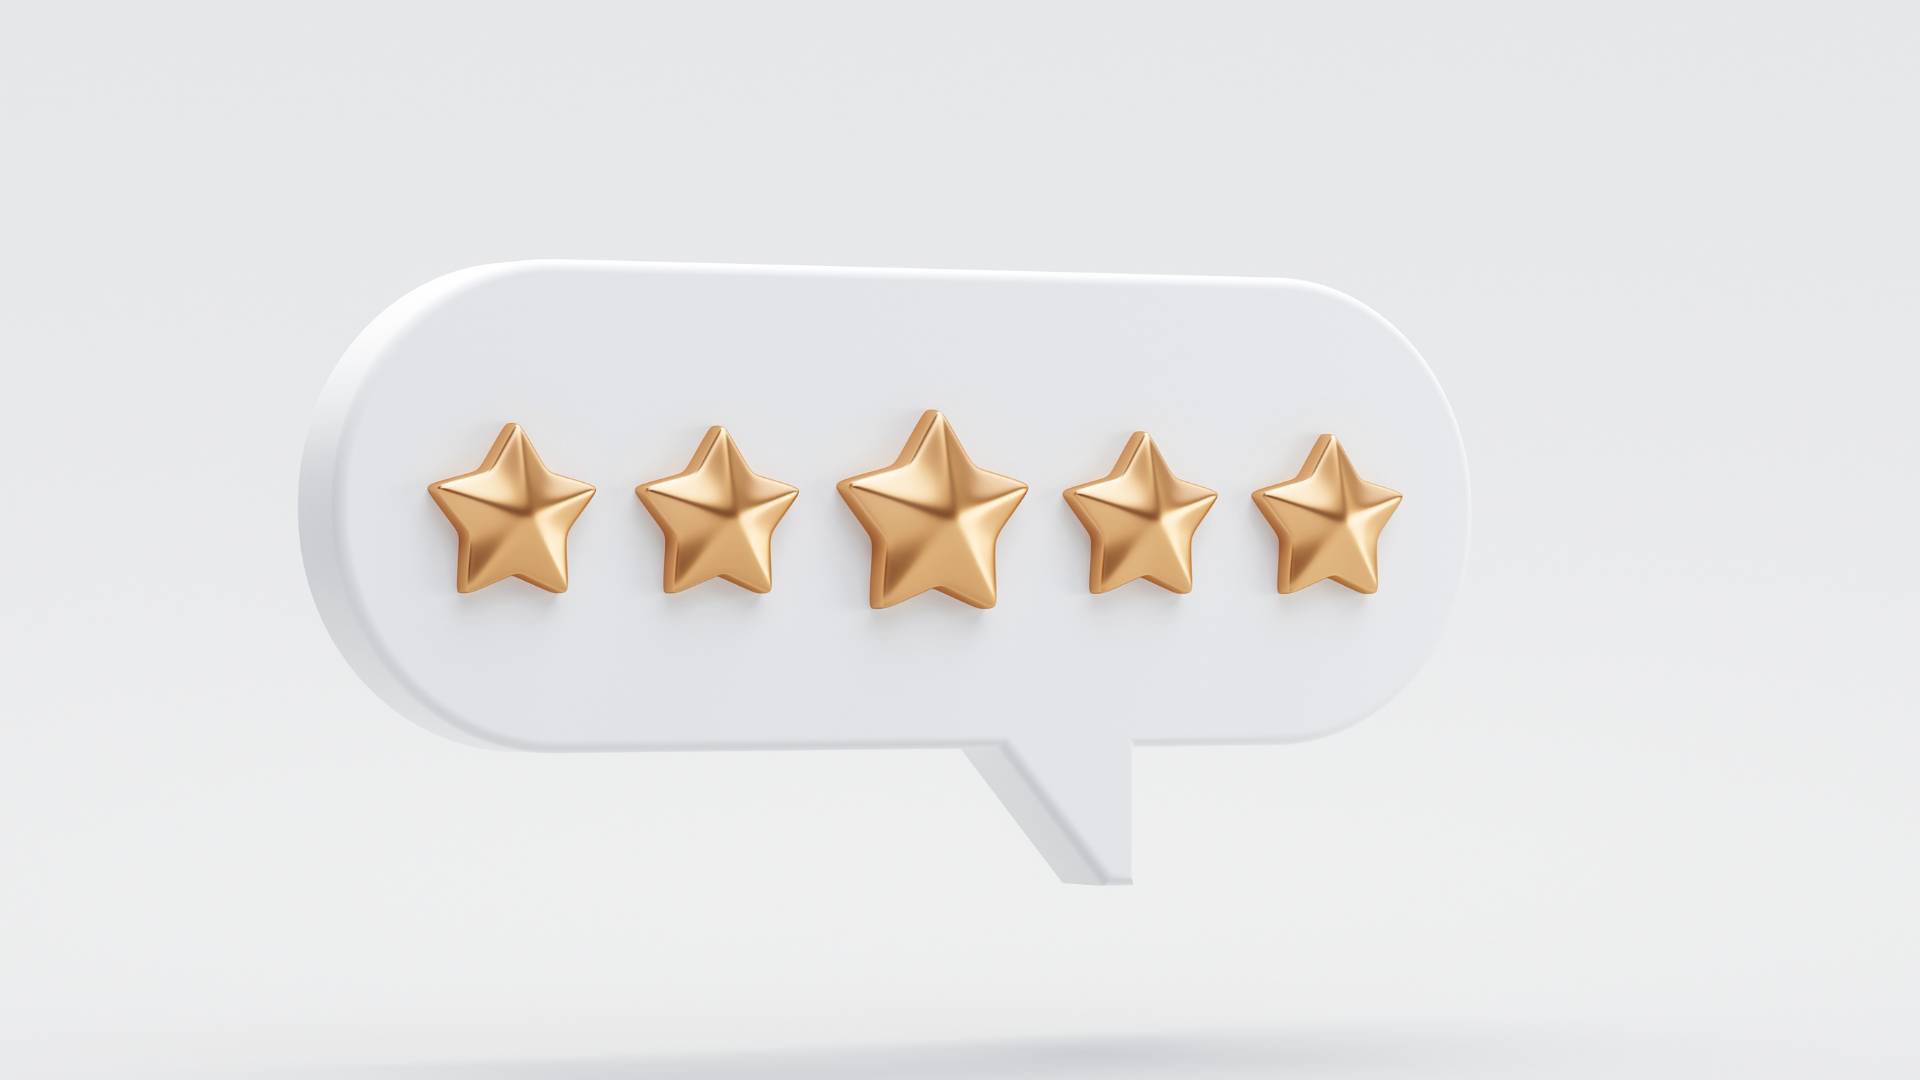 Getting More 5 Star Reviews for Your Business